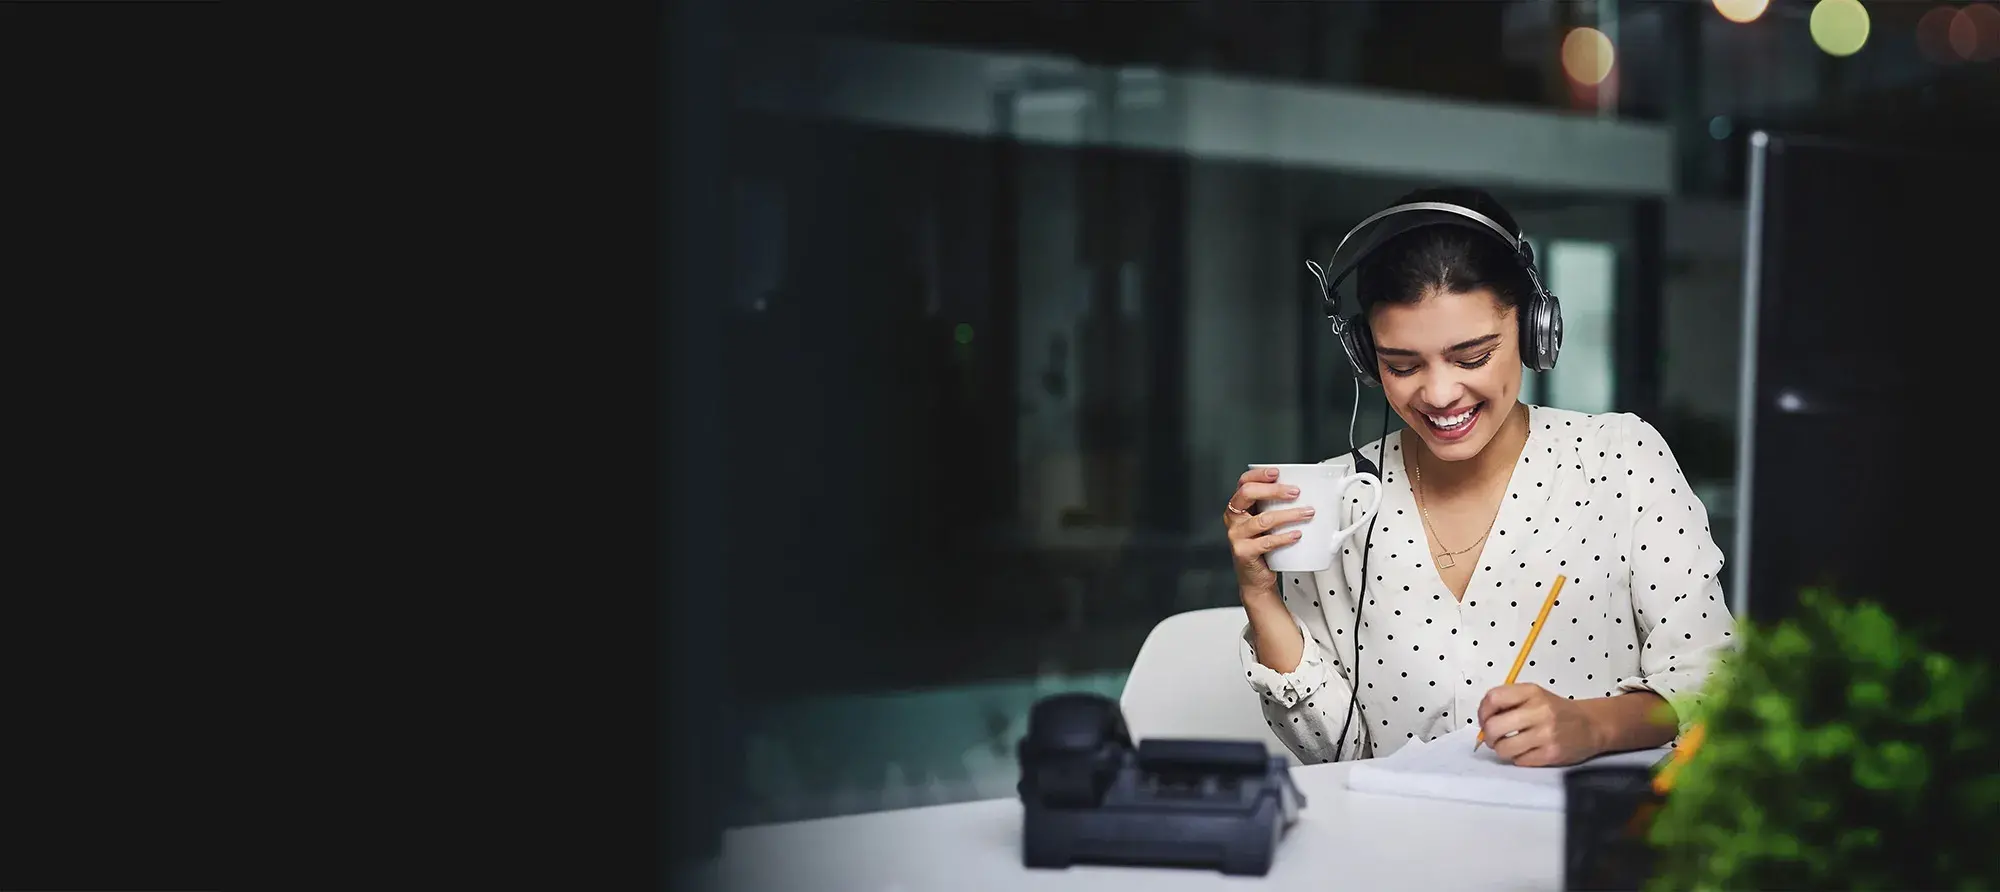 A smiling woman with a headset on taking notes